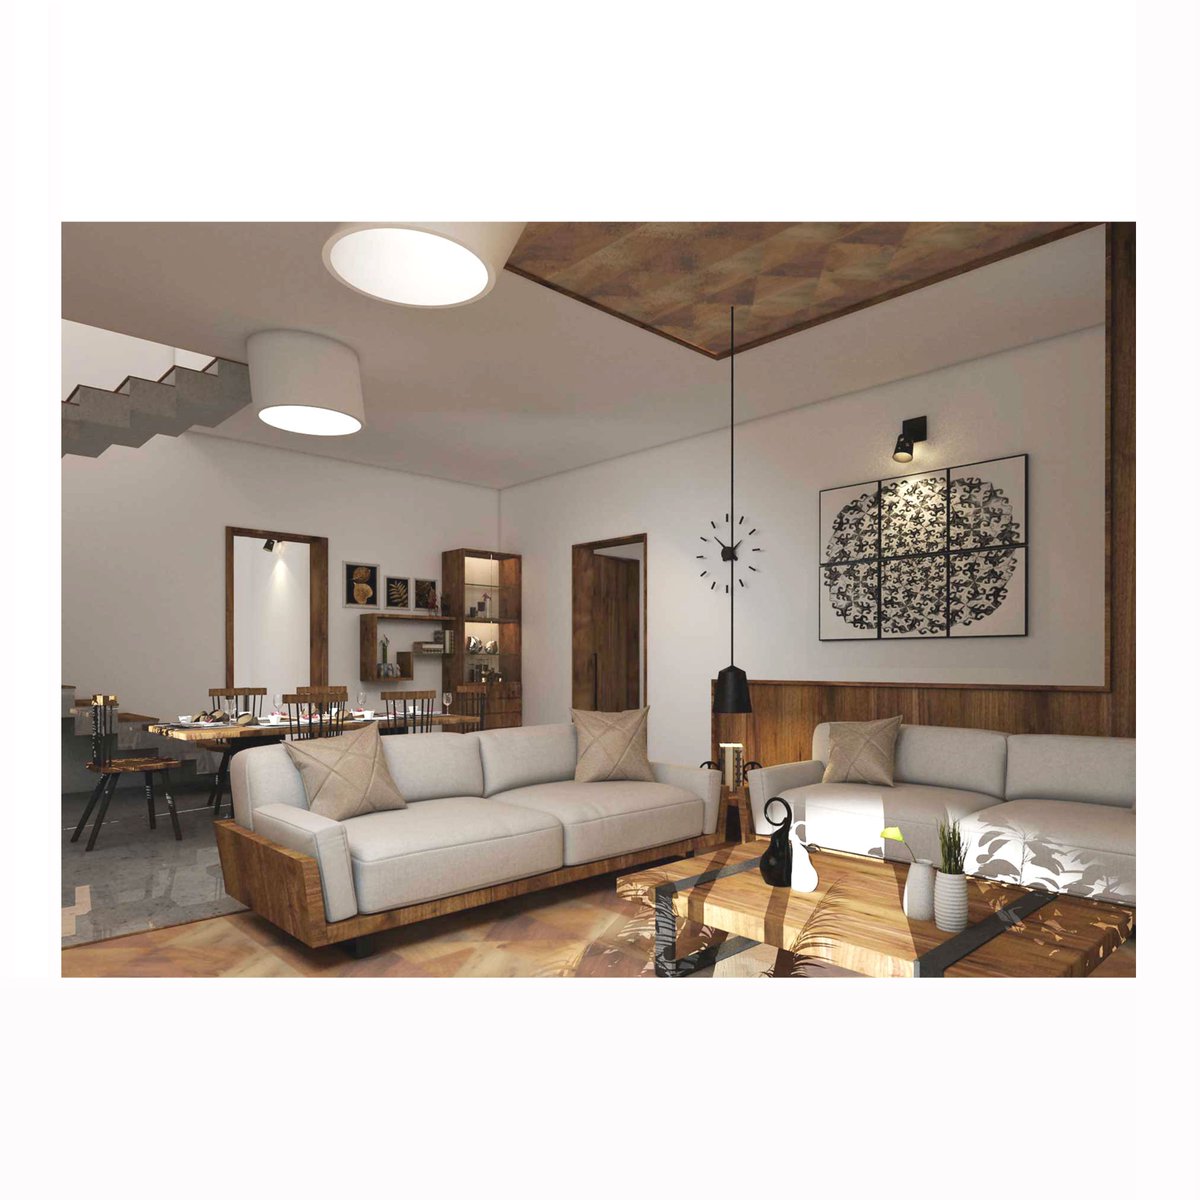 For the KP Living Room, the volume of the living area was reduced by both lowering the ceiling and raising the floor.
#Saransh #ArchitectureandDesign #InteriorDesign #ArchitectsofIndia #IndianArchitect #BeautifulHomes #ArchitectureDose #ThinkingArchitecture #LivingRoom